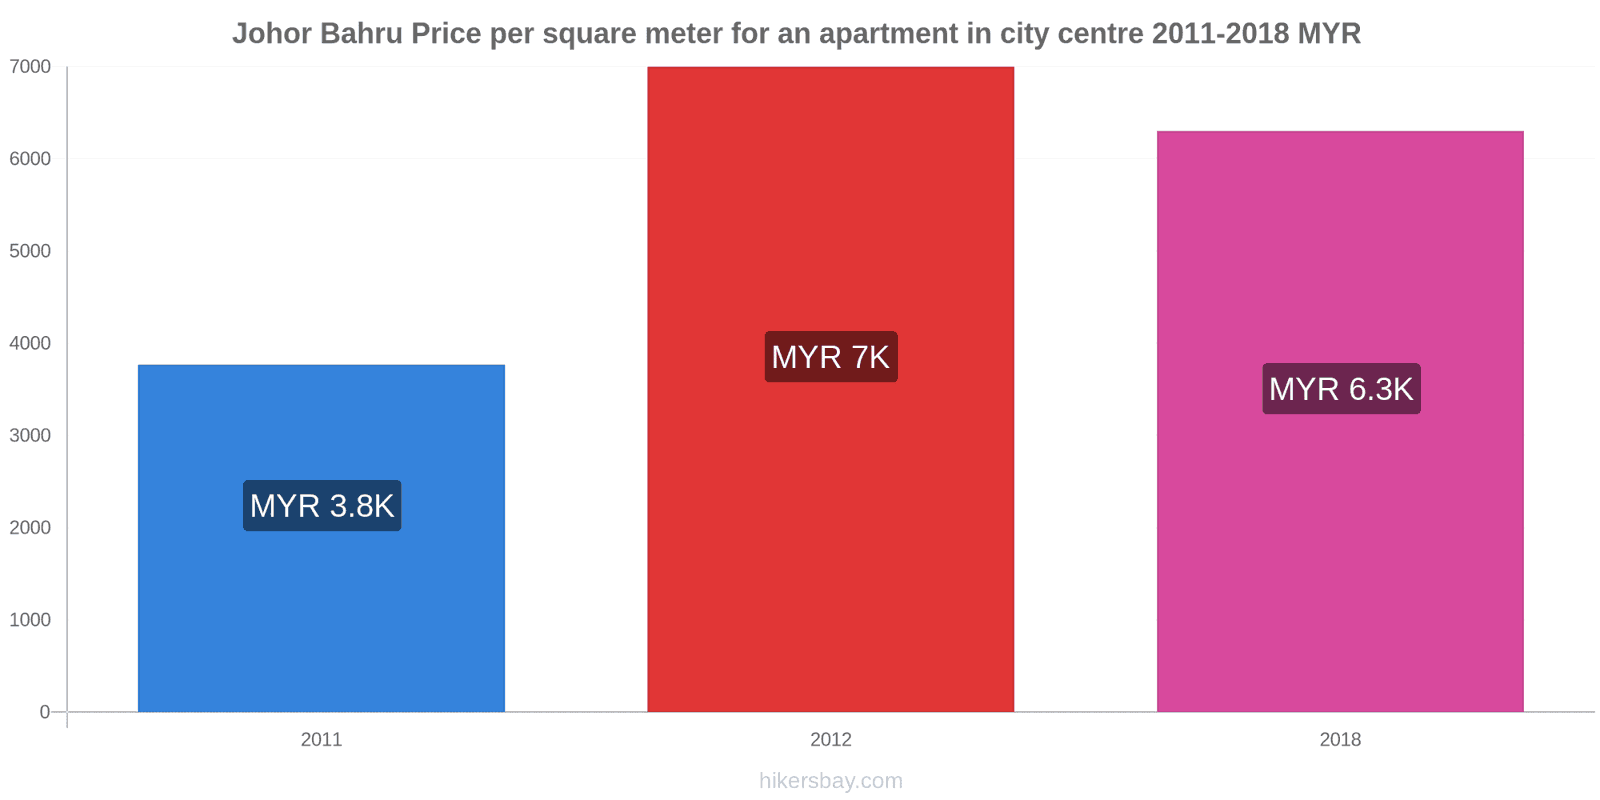 Johor Bahru price changes Price per square meter for an apartment in city centre hikersbay.com